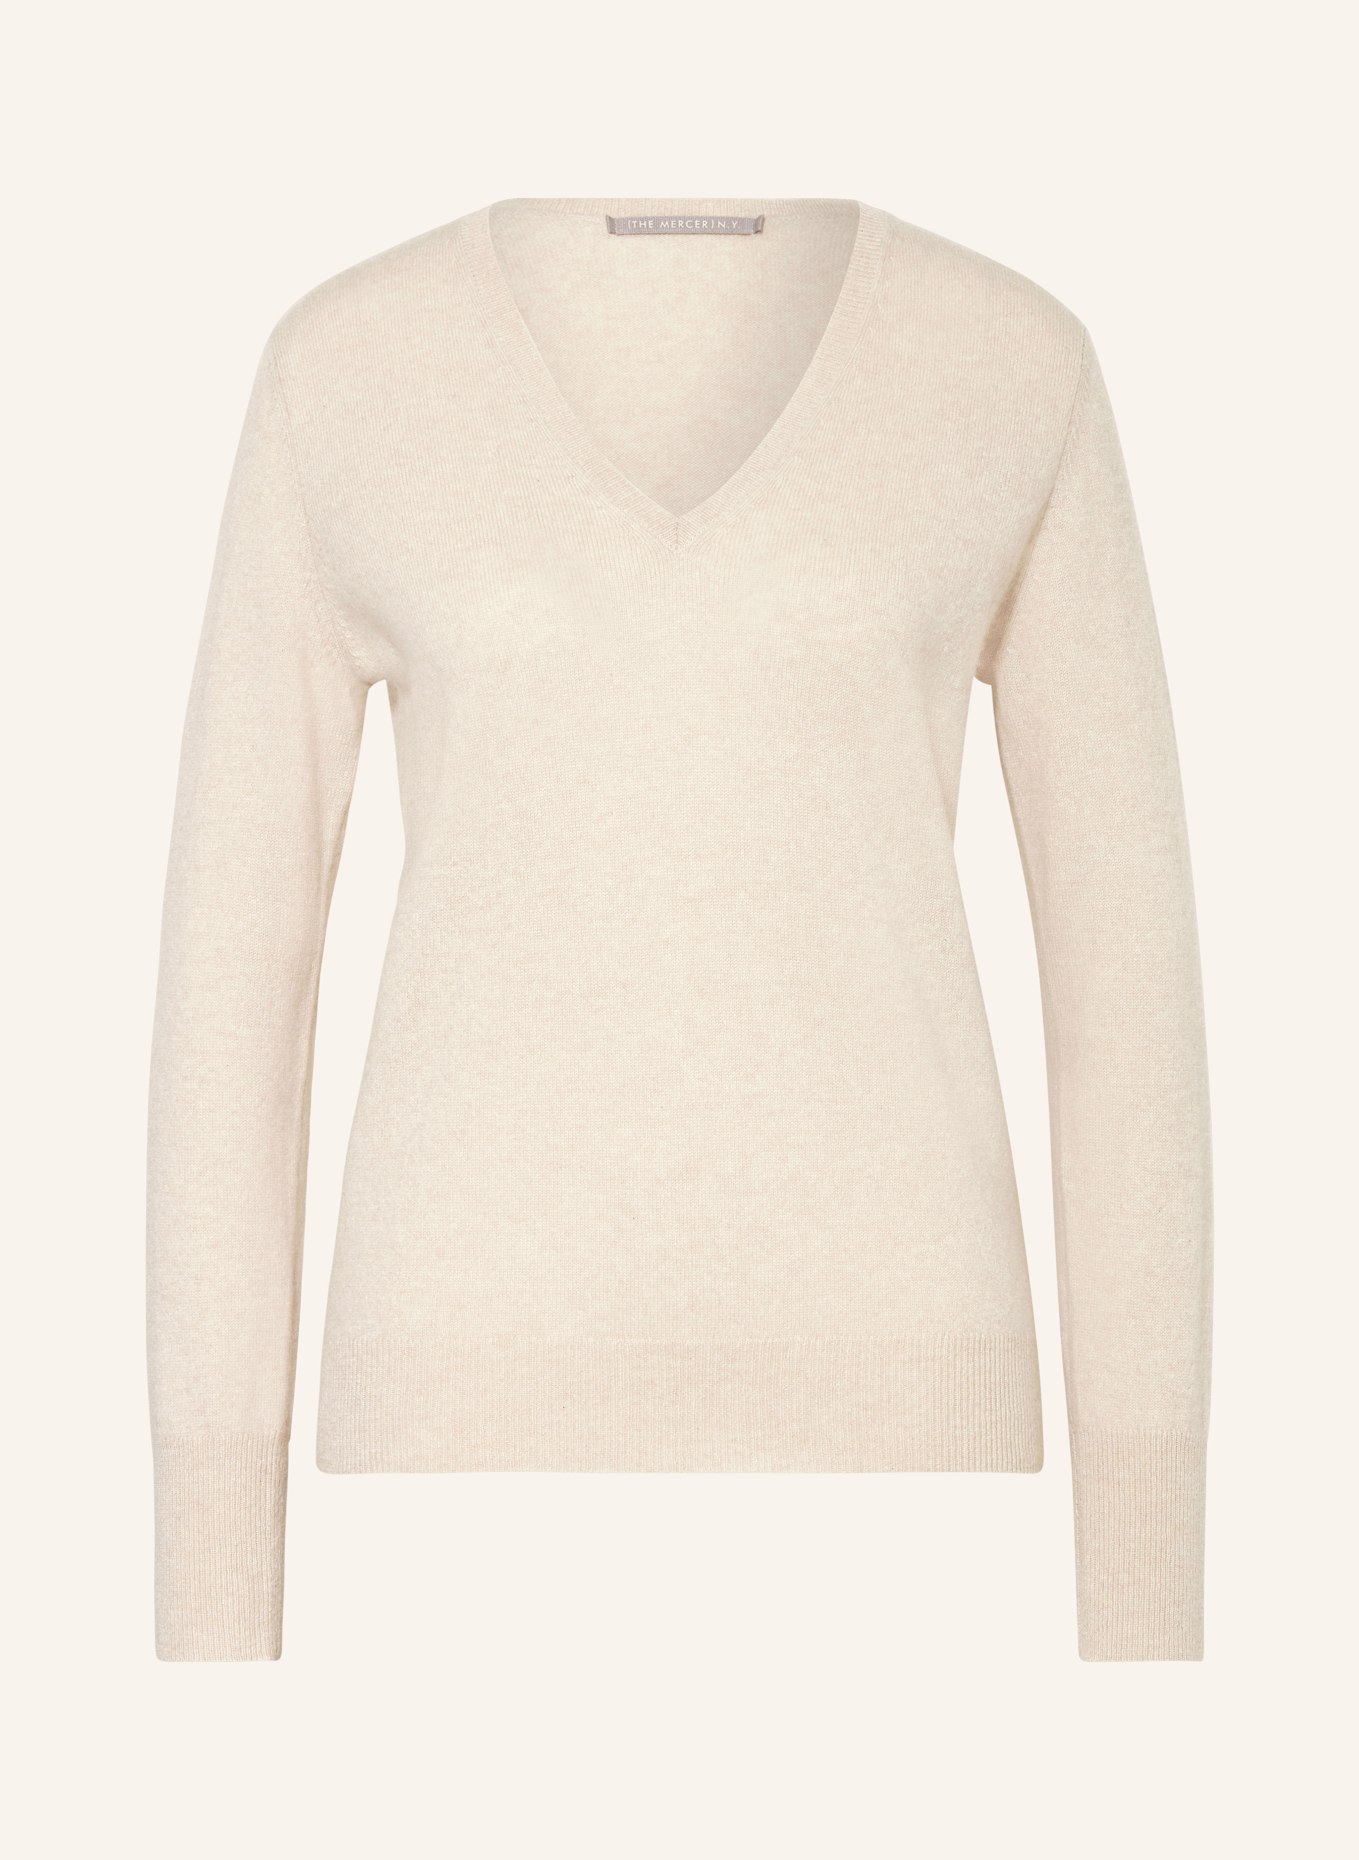 (THE MERCER) N.Y. Cashmere sweater, Color: BEIGE (Image 1)